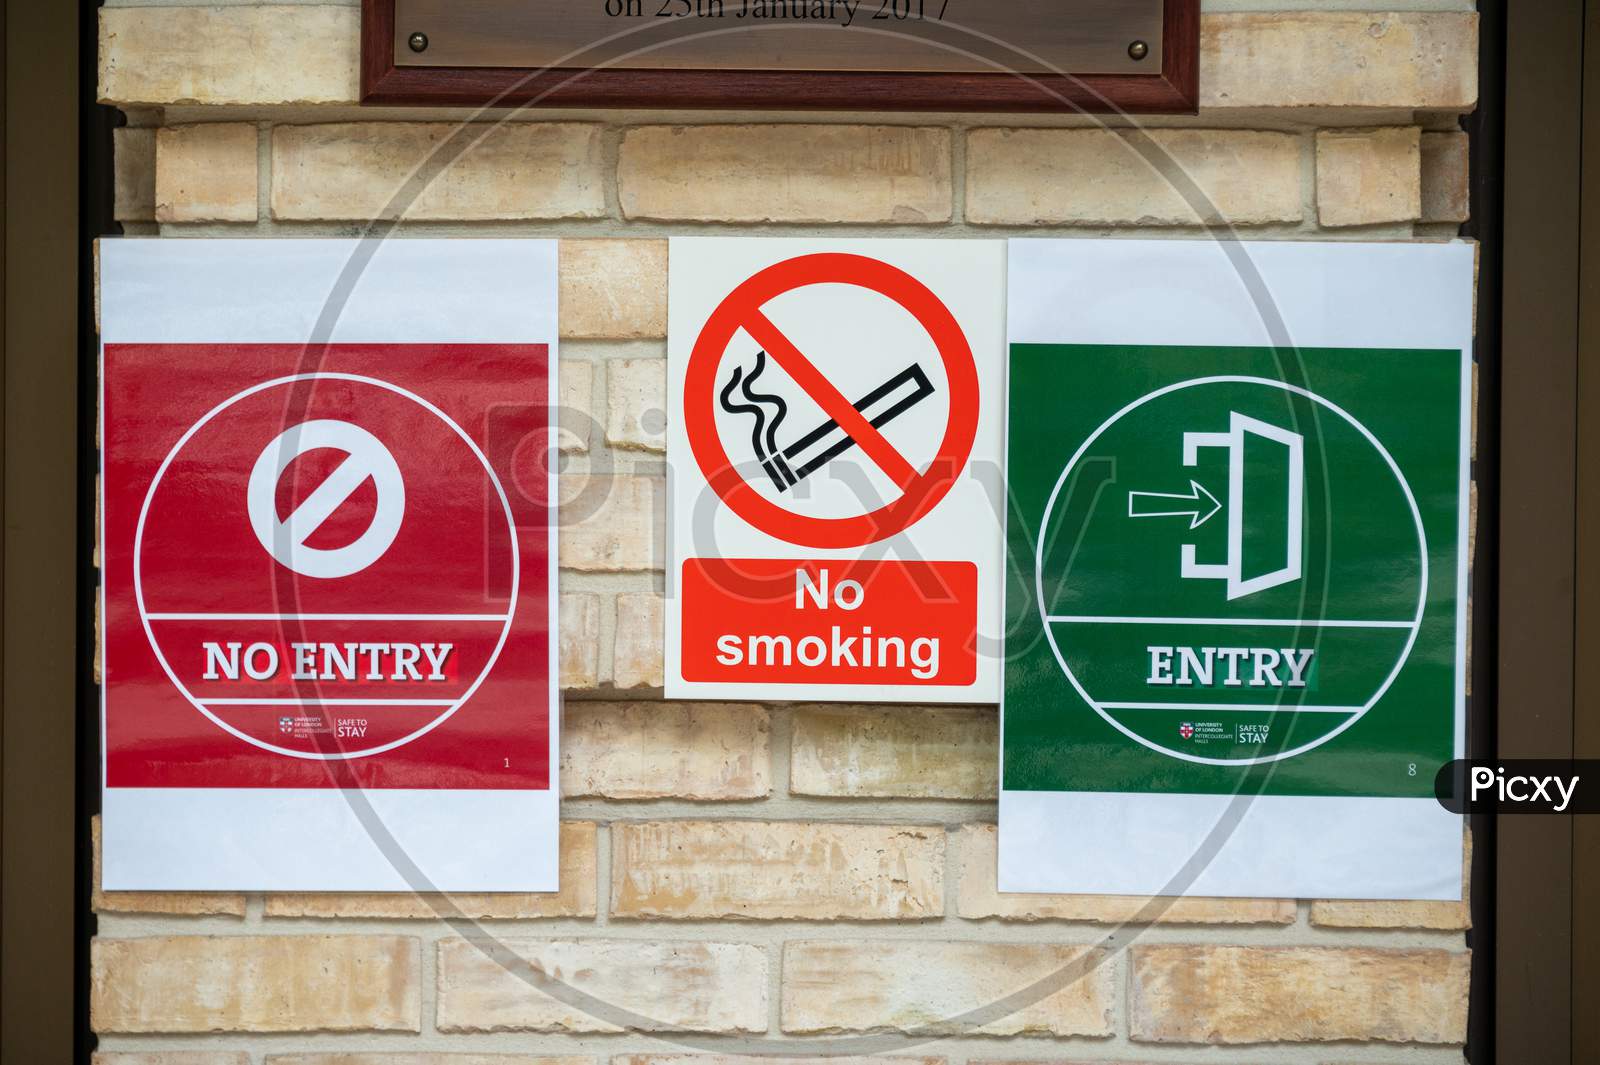 Covid 19 Social Distancing Warning Signs Alongside A No Smoking Sign On The Wall Of A Student Halls Of Residence